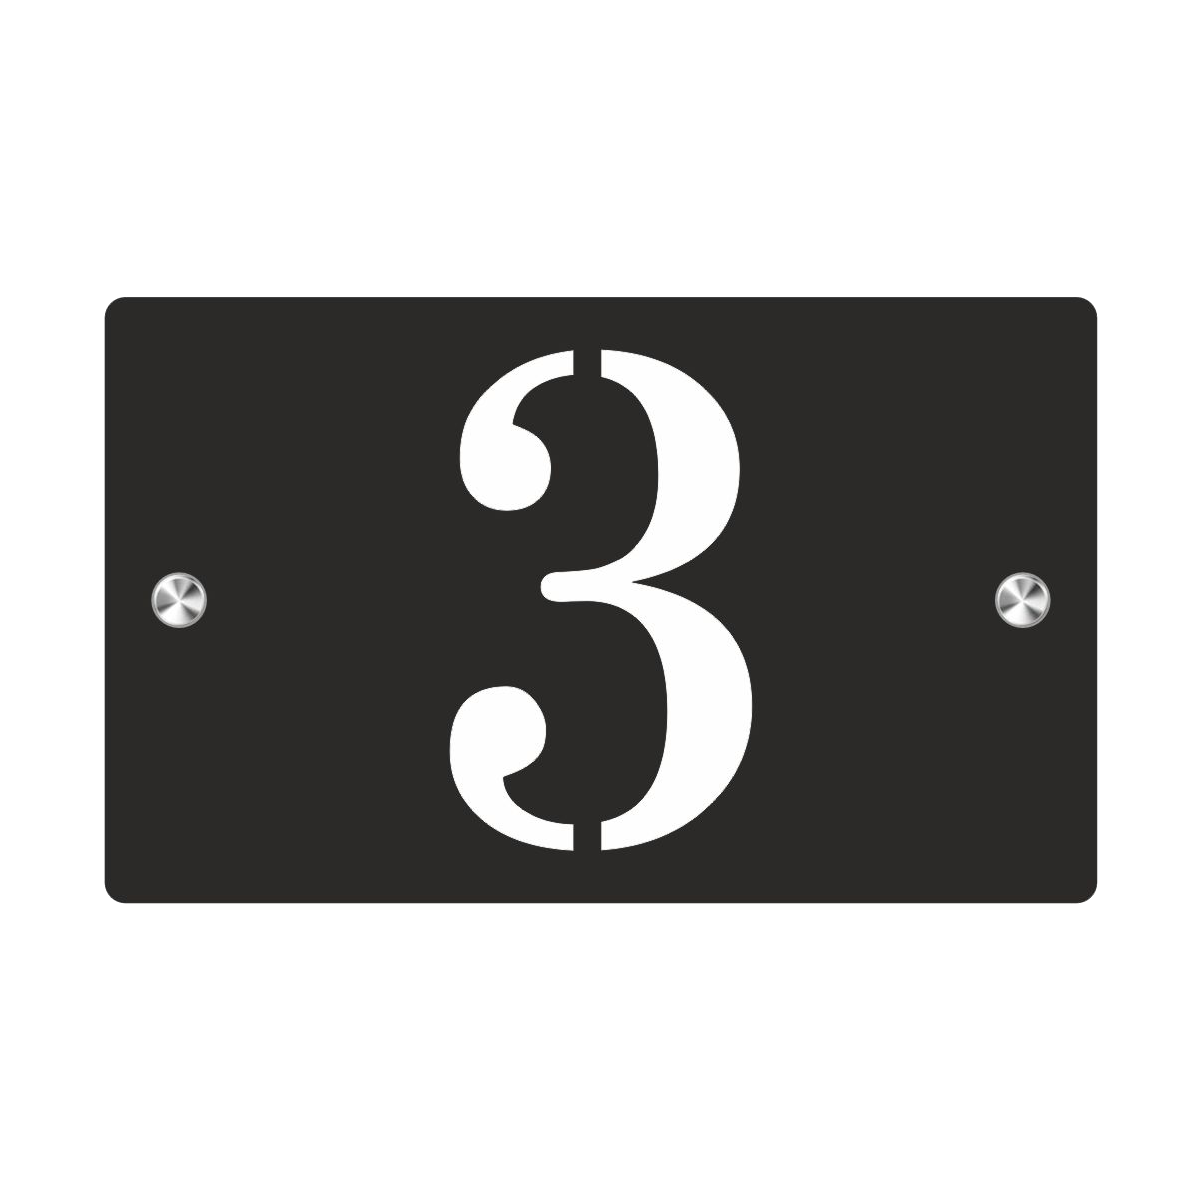 Premium S1 Mini Personalized Street Sign and House Number Black White Background 